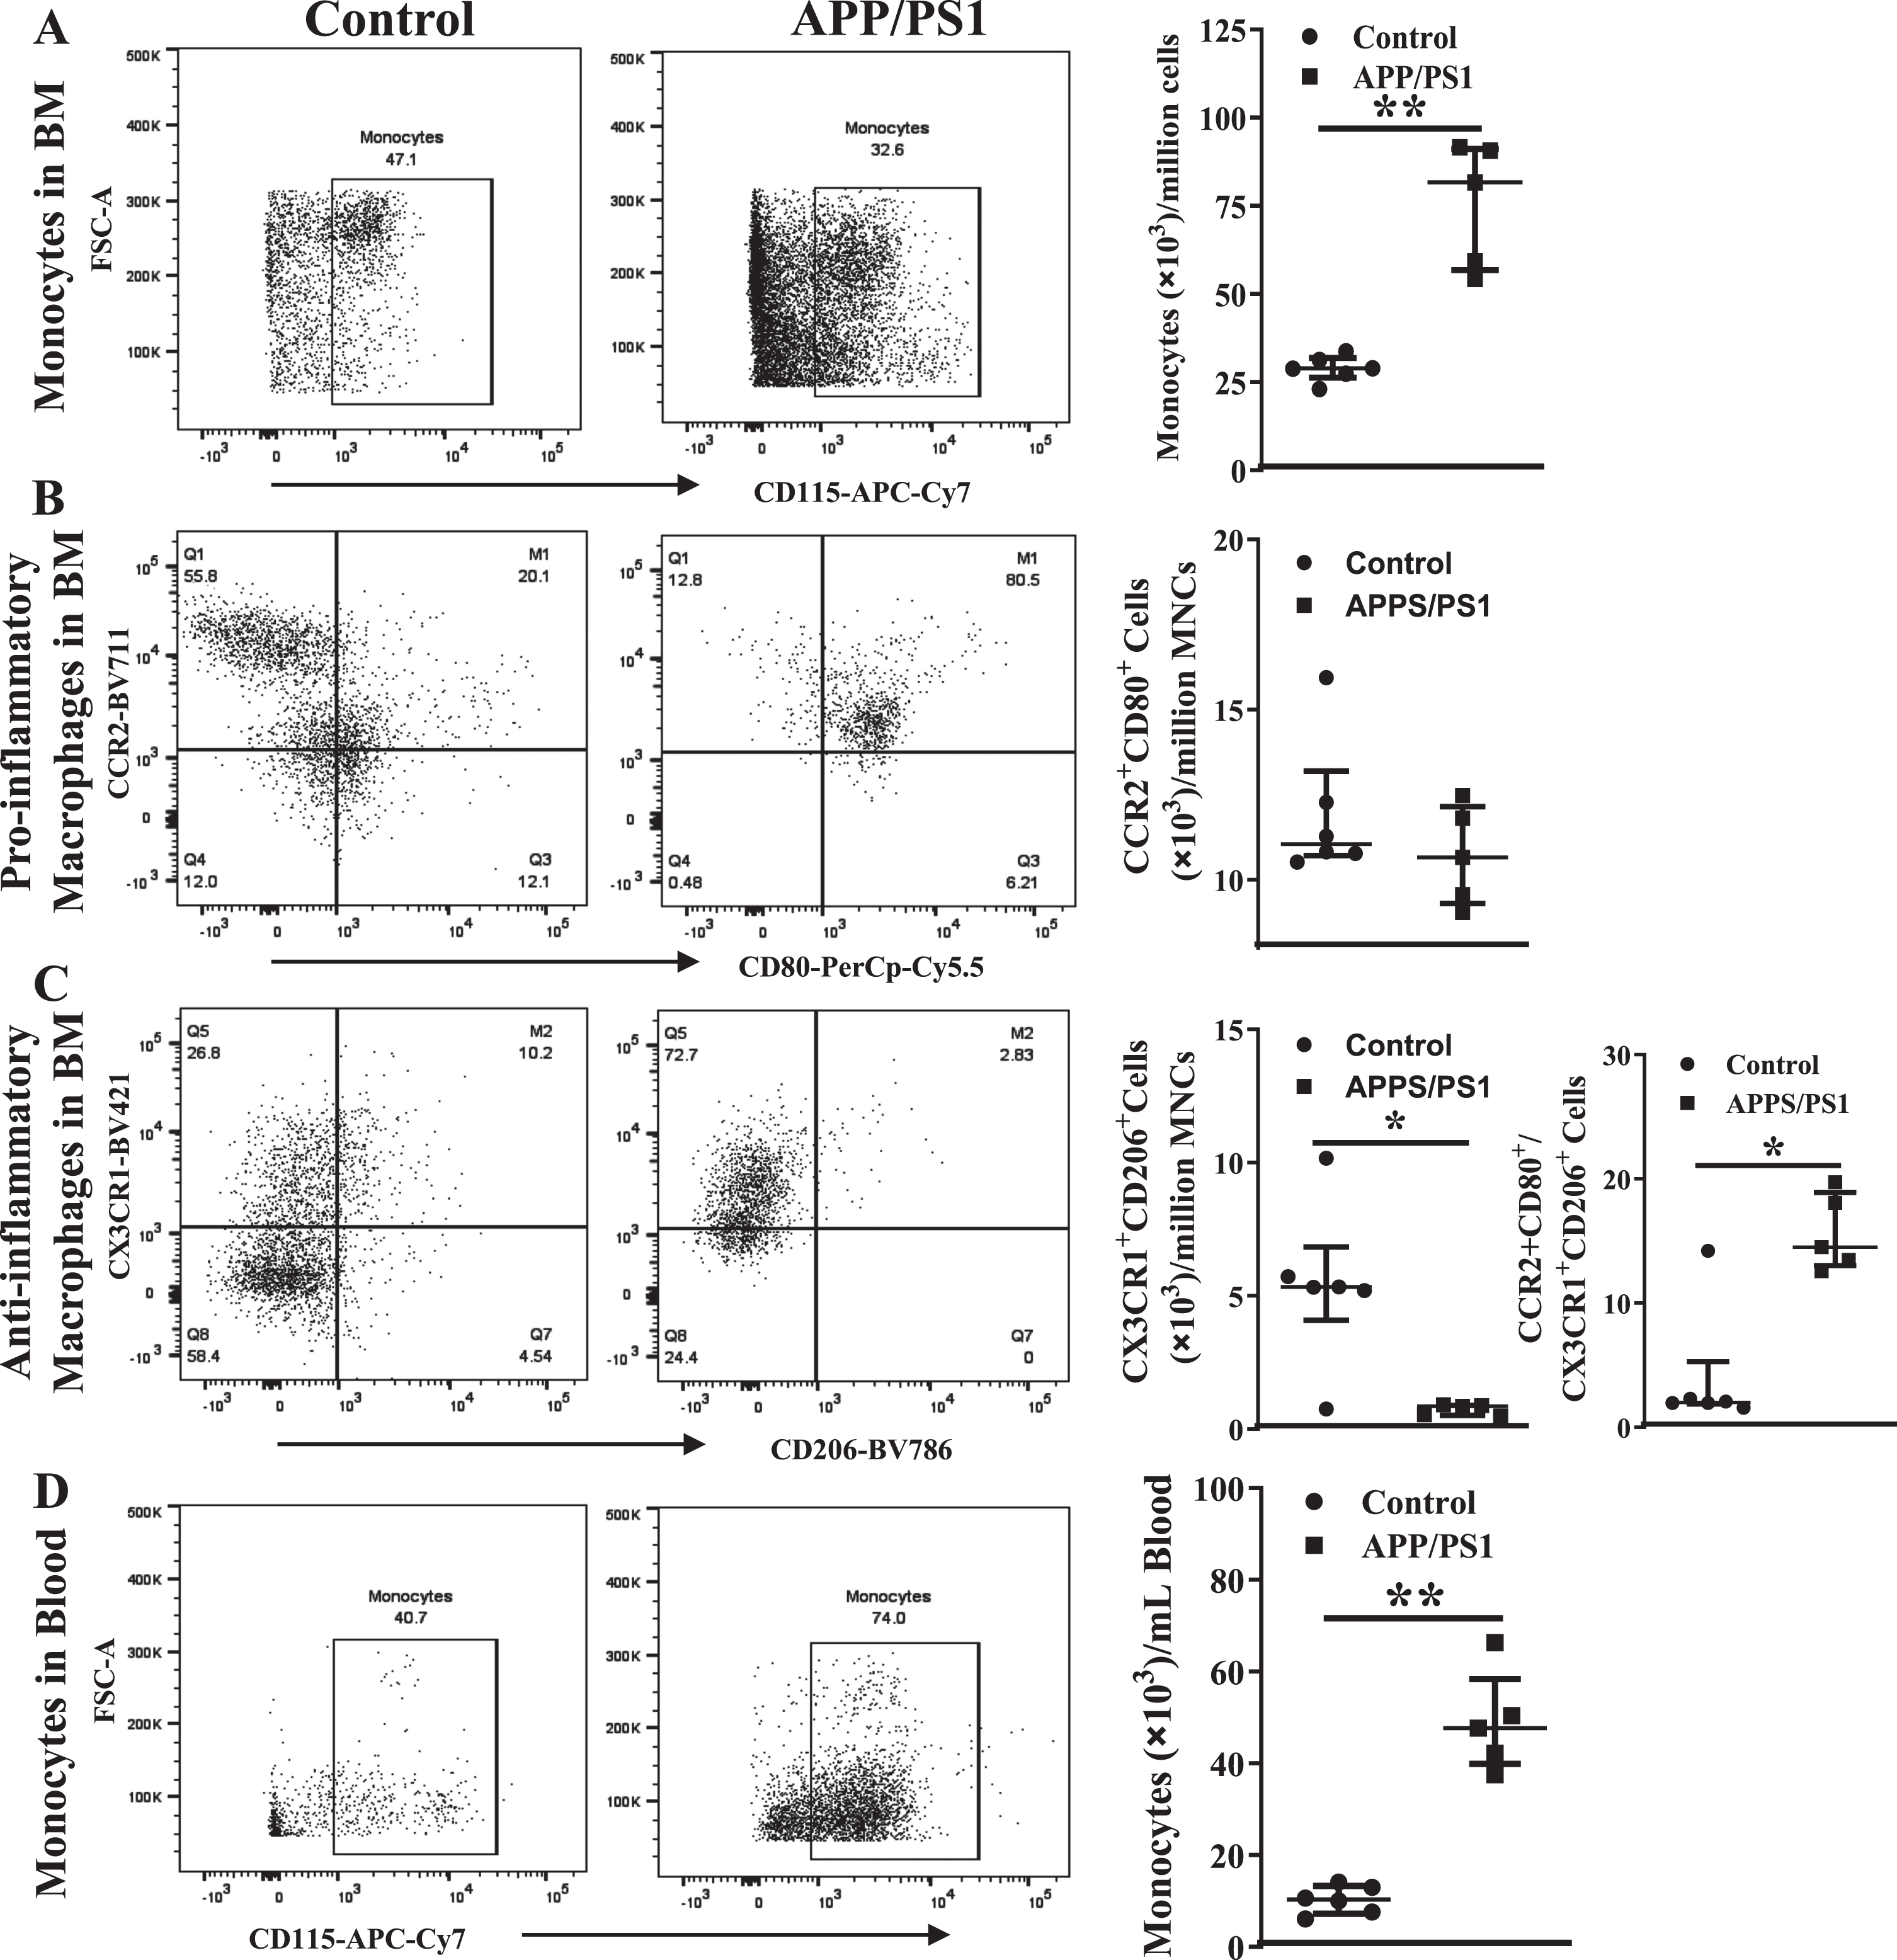 Increased numbers of monocyte-macrophages in the circulation and the bone marrow of APP/PS1 mice. Representative flow cytometry dot plots for the enumeration of monocyte-macrophages in the bone marrow (A– C) and blood (D). Monocytes (CD45+Ly6G−Ly6C+CD115+) were higher (**p < 0.01) (A) and the anti-inflammatory macrophages (CD45+CD11b+Ly6G−Ly6C+F4/80+CX3CR1+CD206+) were lower (*p < 0.05) (B) in the APP/PS1 bone marrow (n = 6) compared to that in the control (n = 5) while the pro-inflammatory macrophages (CD45+CD11b+Ly6G−Ly6C+F4/80+CCR2+CD80+) (C) were not different. Ratios of pro-/anti-inflammatory macrophages were significantly higher in the APP/PS1 bone marrow compared to the control (*p < 0.05). The number of monocytes in the circulation was higher (D) in the APP/PS1 compared to control (**p < 0.01). Mann-Whitney test was used to analyze the datasets for statistical significance.